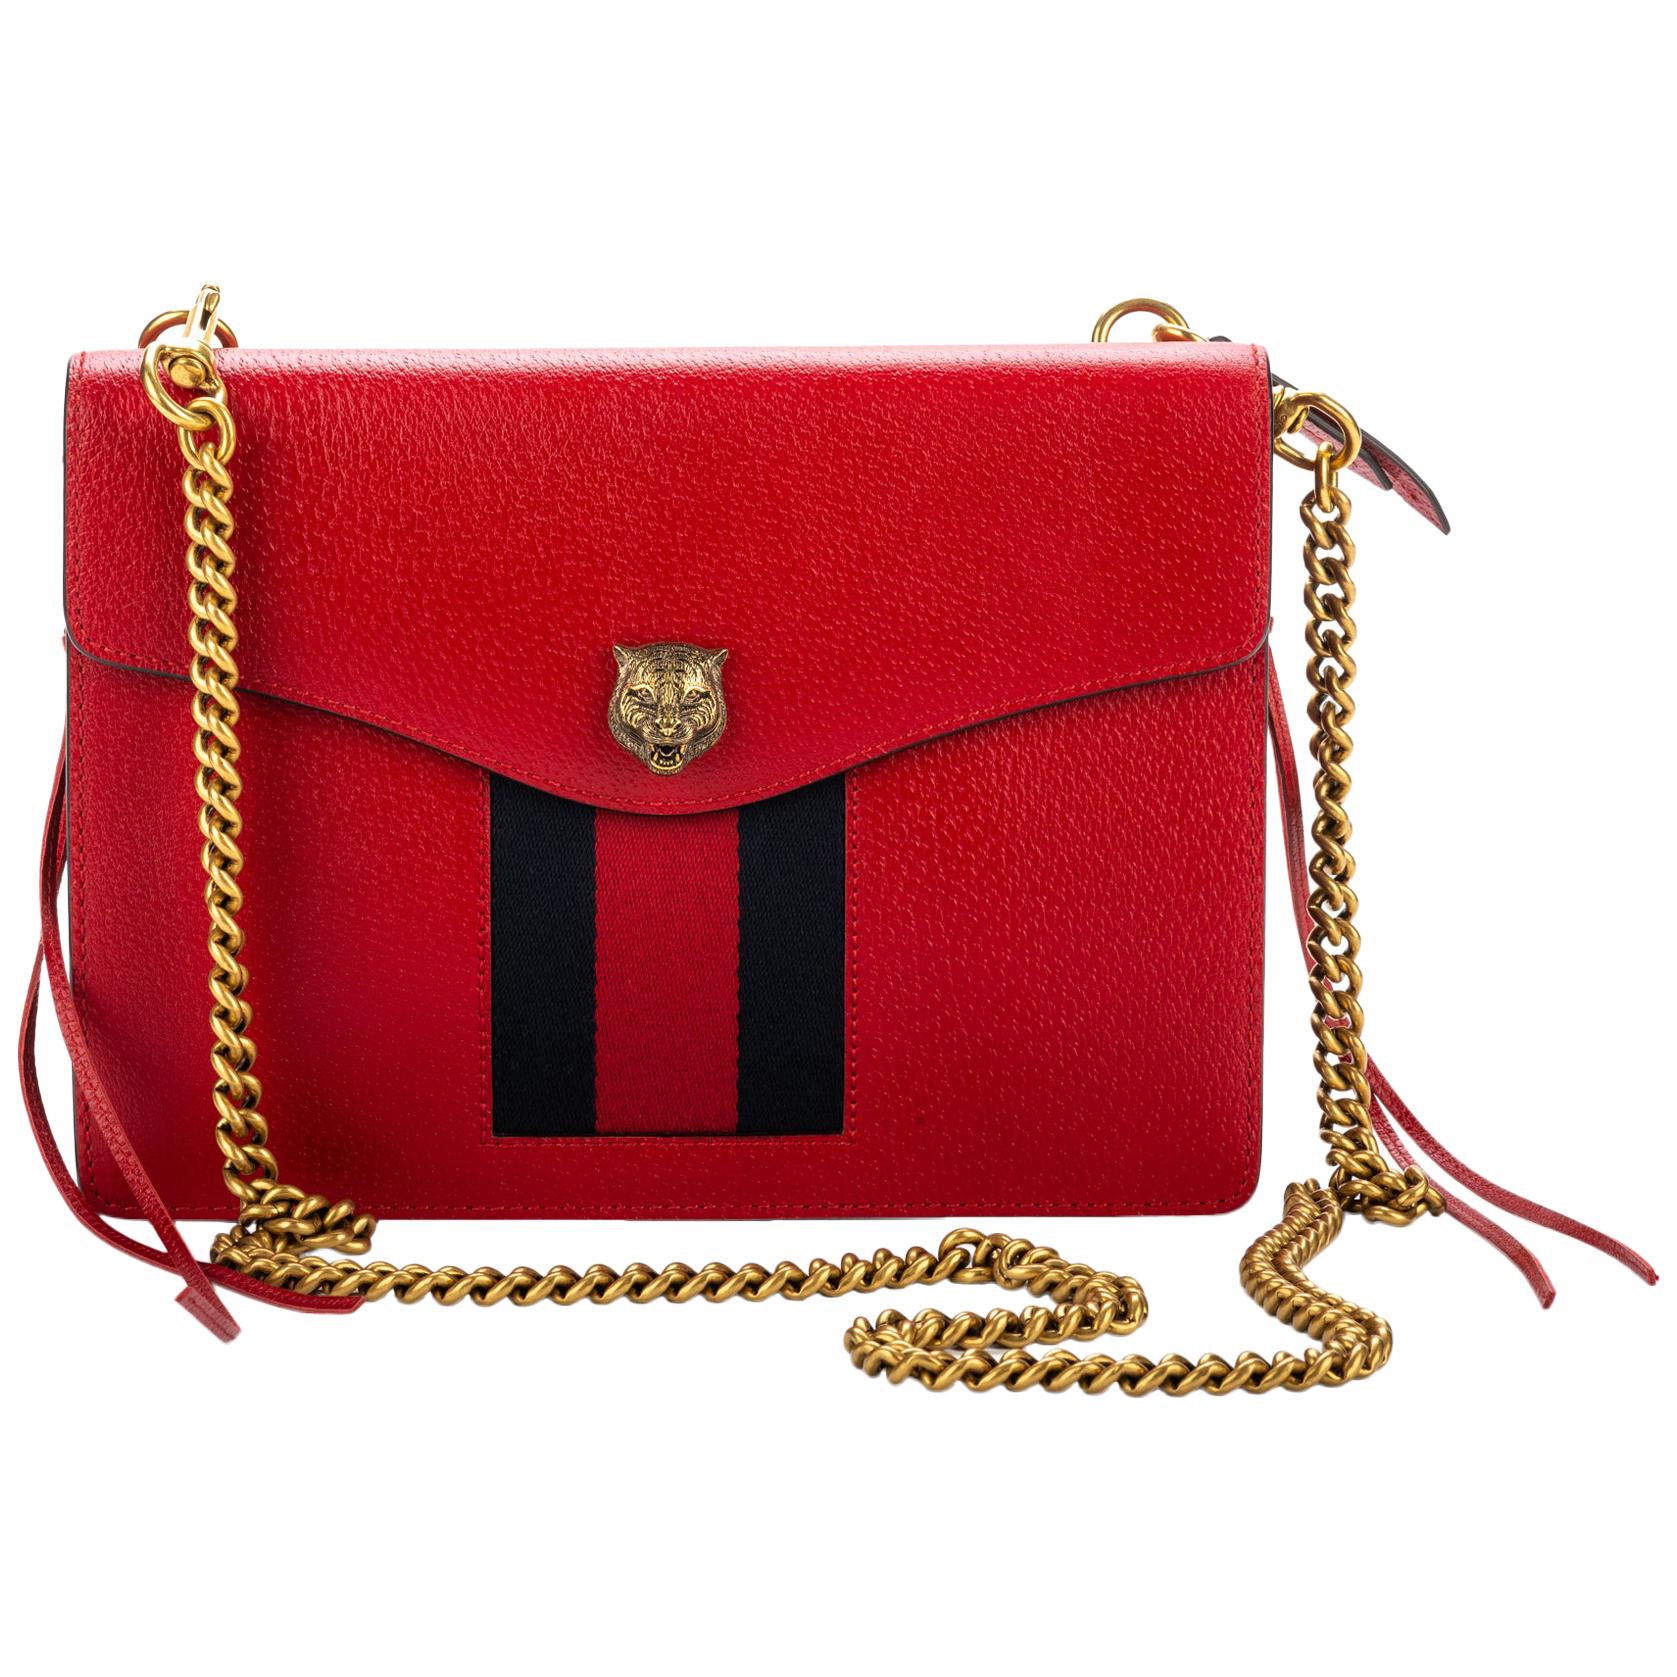 Gucci Red Leather Cross Body Bag